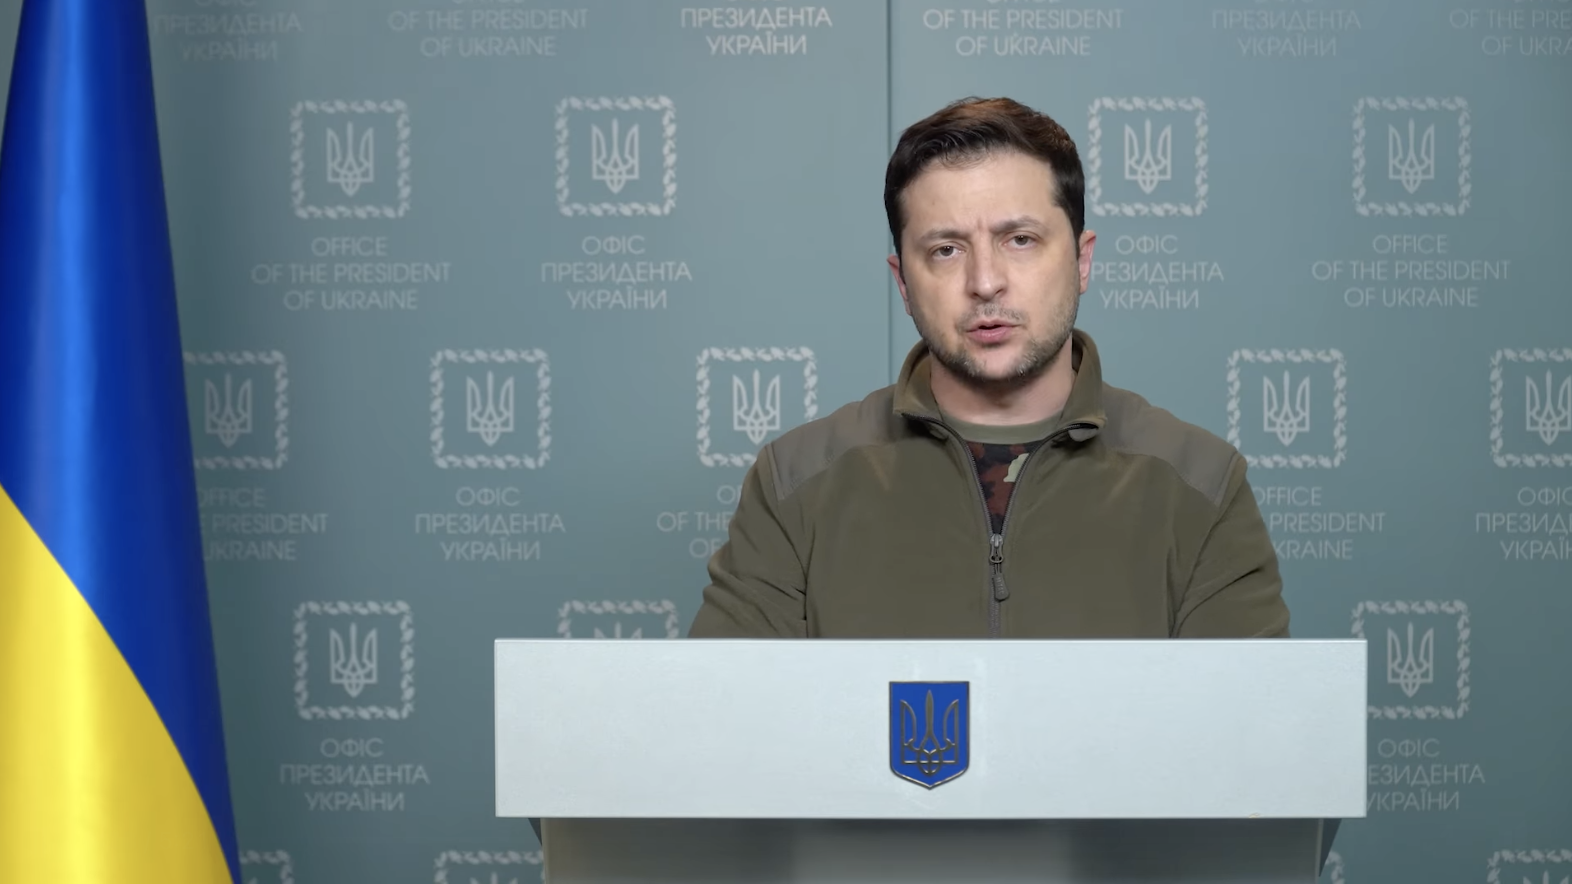 Ukrainian President Volodymyr Zelensky delivers a video message from Kyiv as he asks the European Union to "urgently admit Ukraine" to the bloc on February 28.